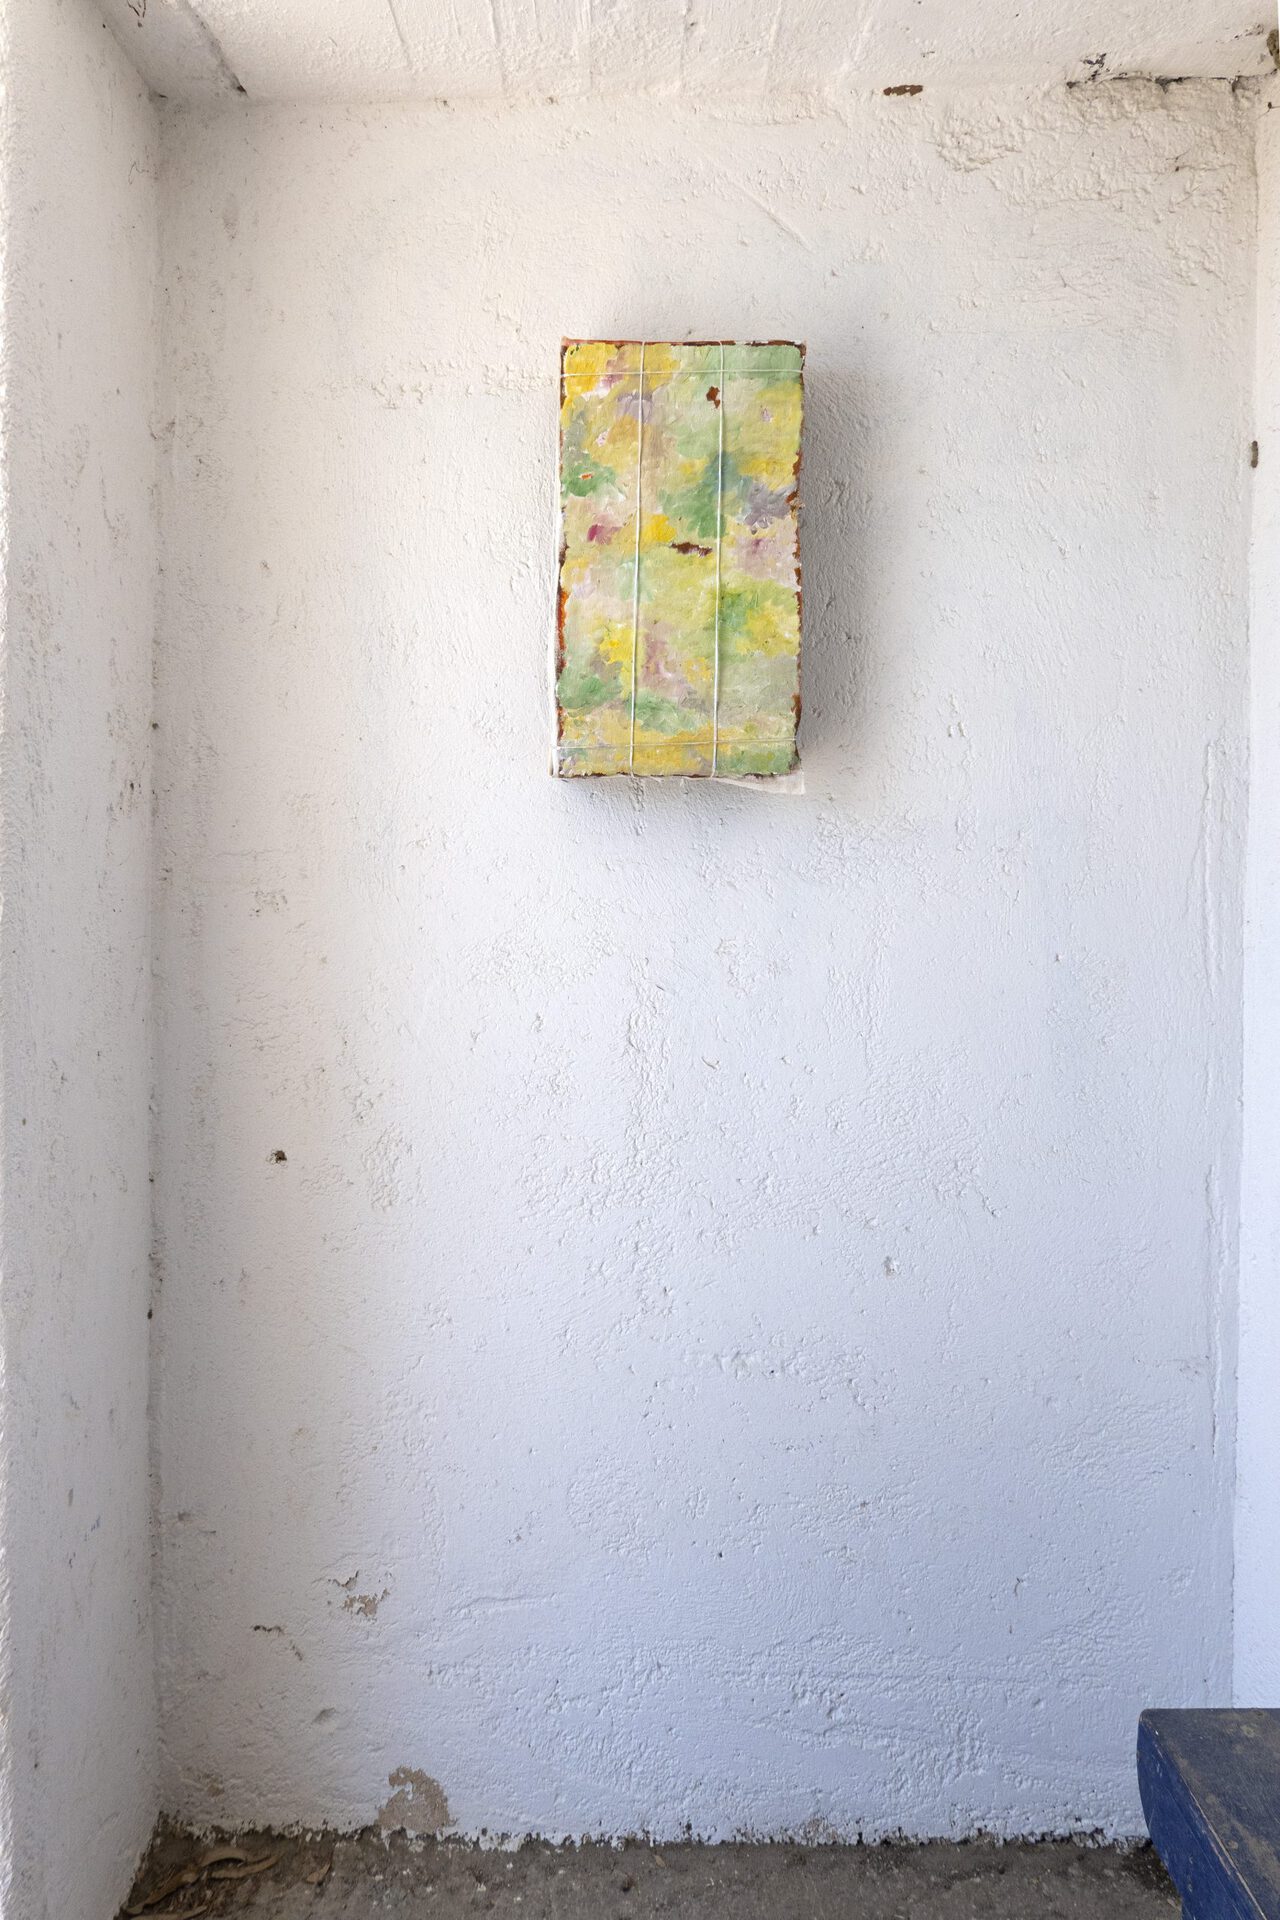 Ishai Shapira Kalter, "Aspro Chorio", 2021. Installation view. Oil painting on canvas, glued, stretched, and tied with nylon string to a vegetable / fruit wooden crate, signed with blue pen. 46 x 27 x 9.5 cm